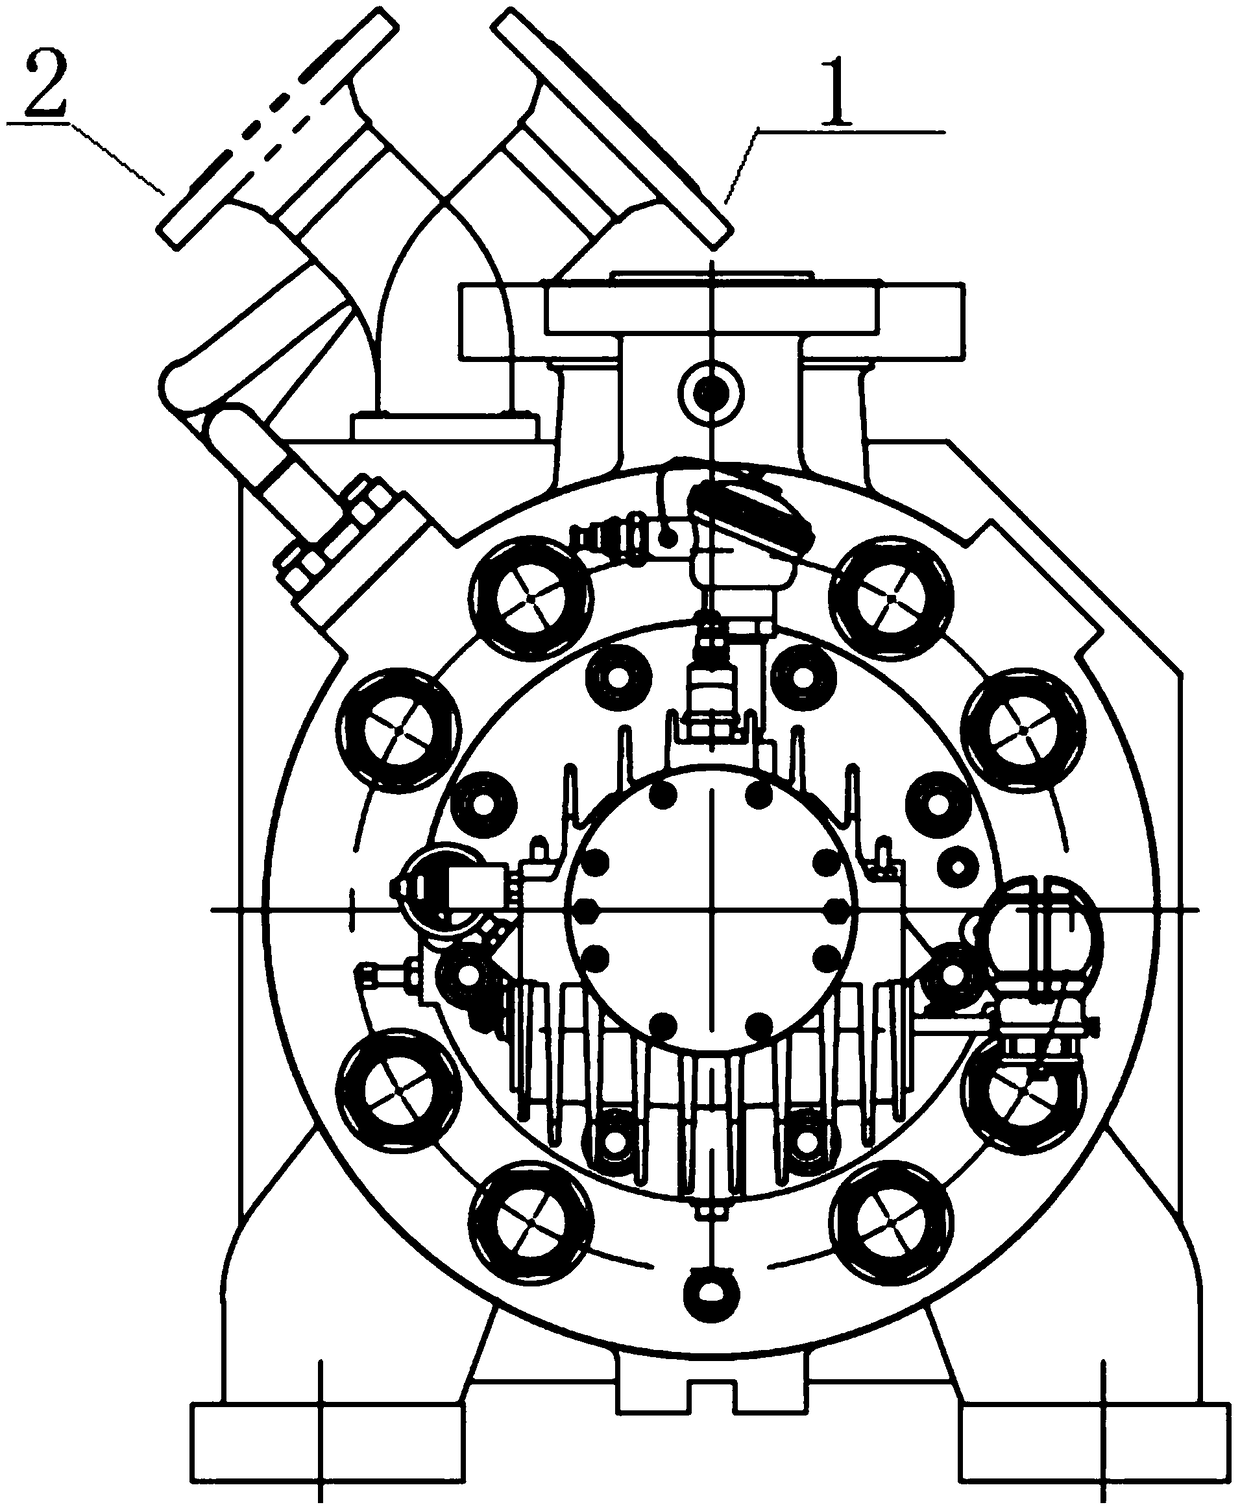 High-pressure pump with energy recovery turbine